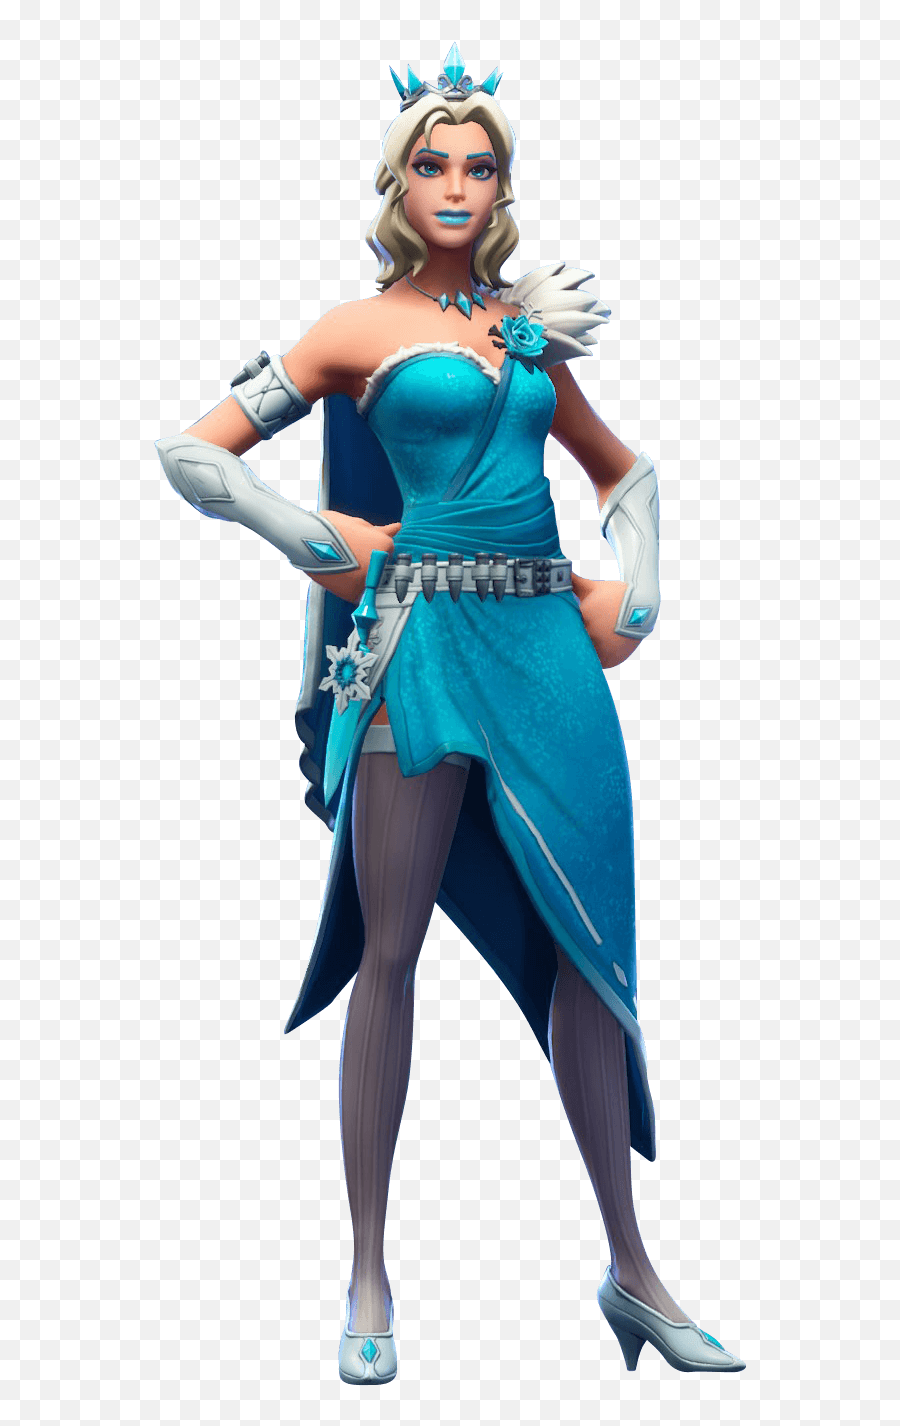 Fortnite Glimmer Skin - Fortnite Glimmer Skin Png,Glimmer Png